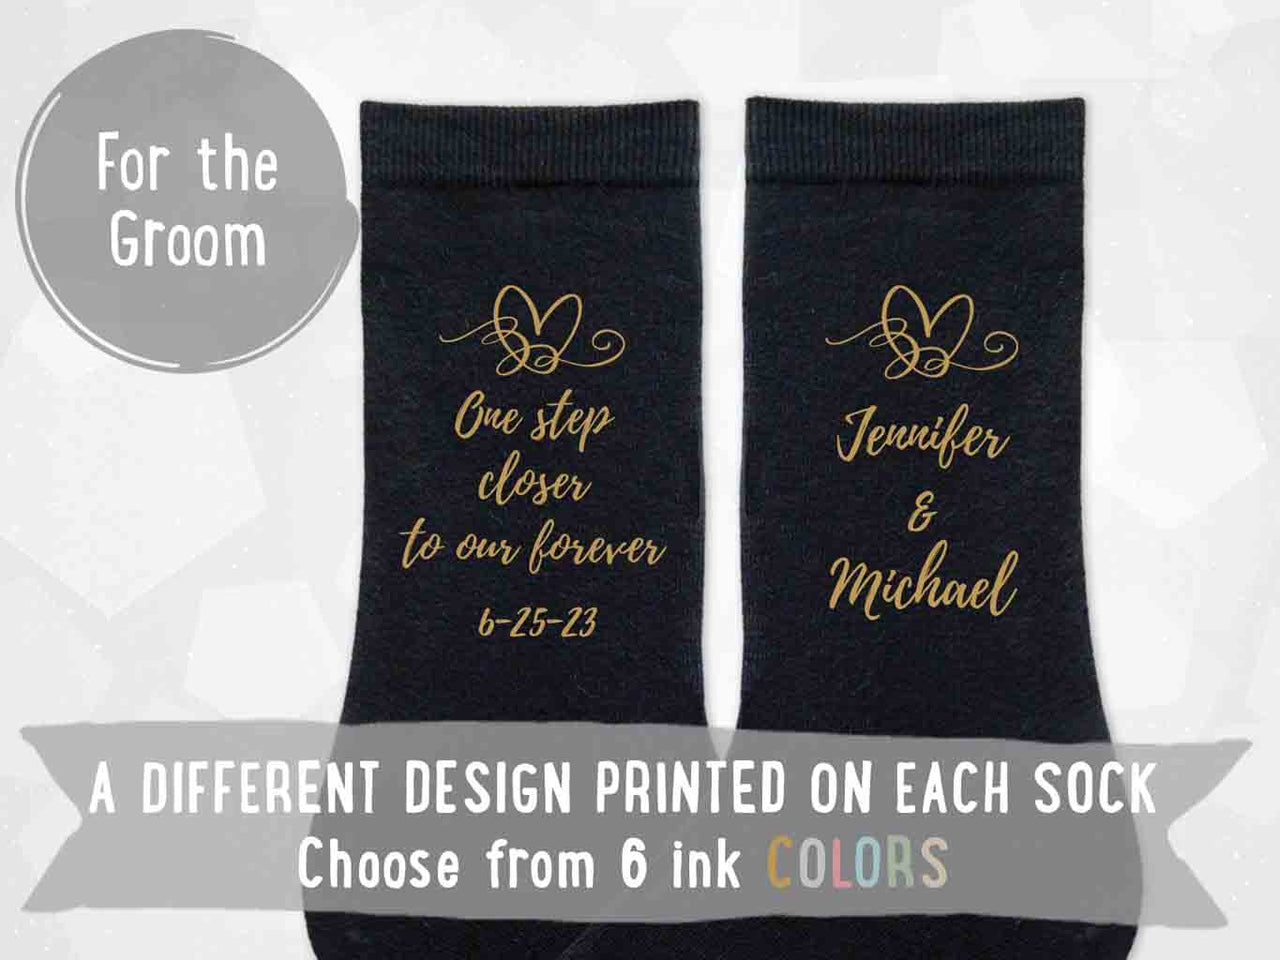 One step closer to our forever with heart design and personalized with your names and wedding date digitally printed on flat knit dress socks.